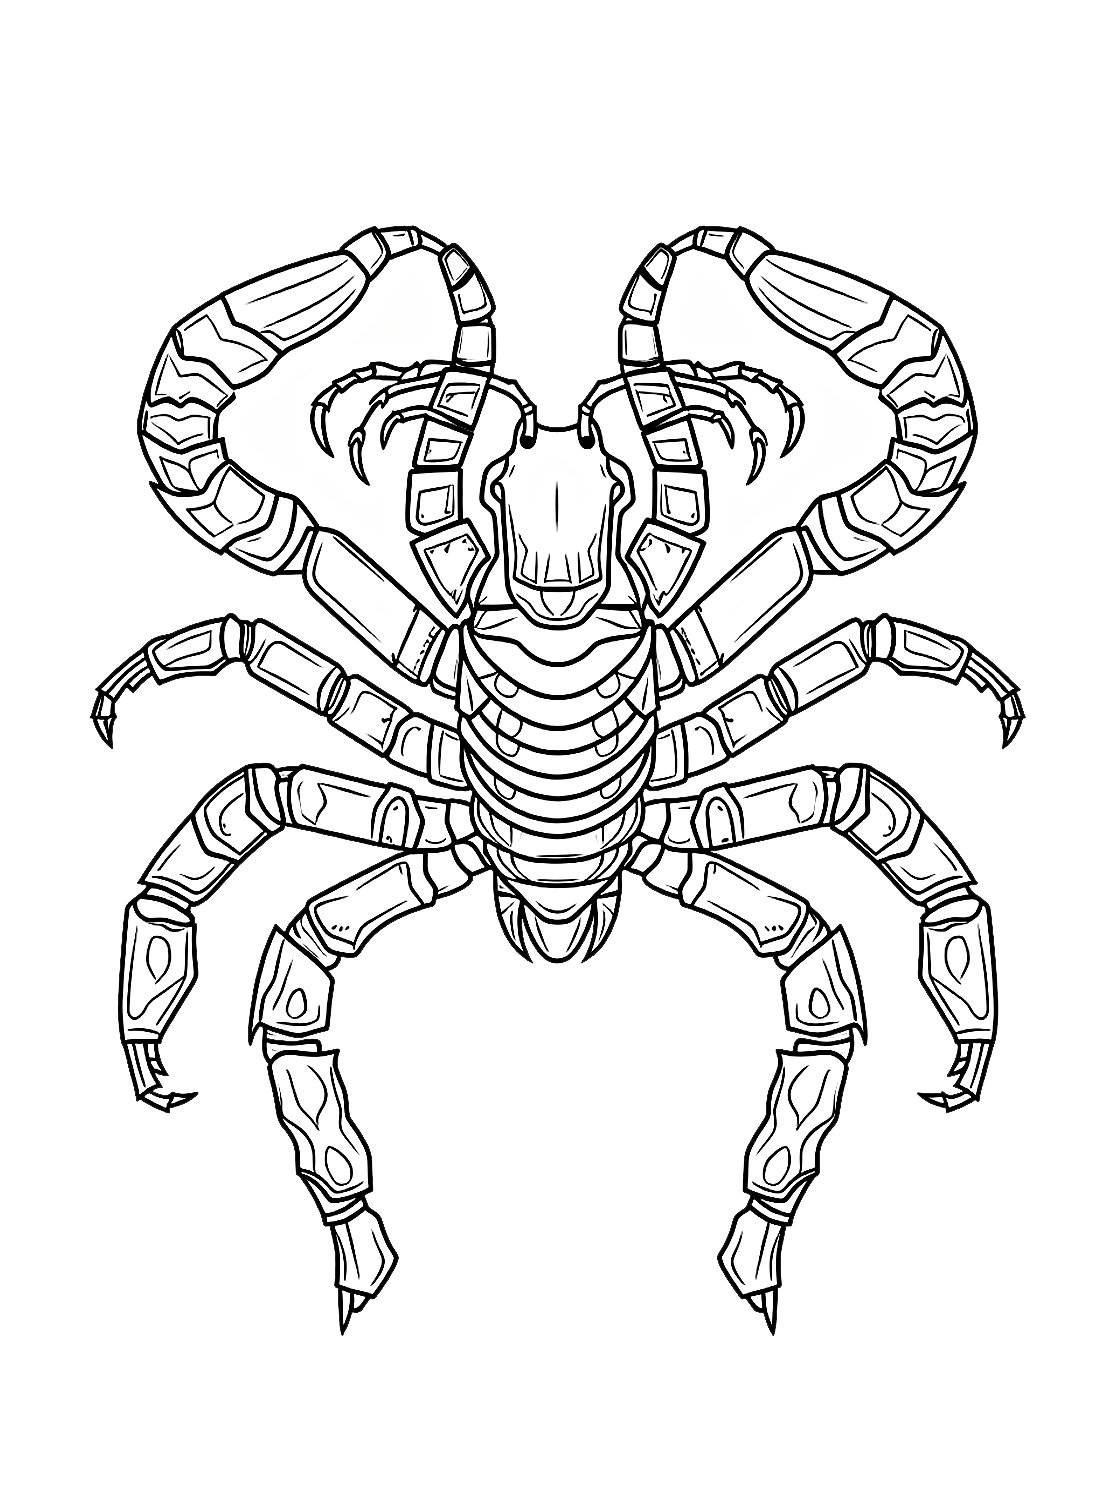 printable Scorpion Coloring Page - Free Printable Coloring Pages